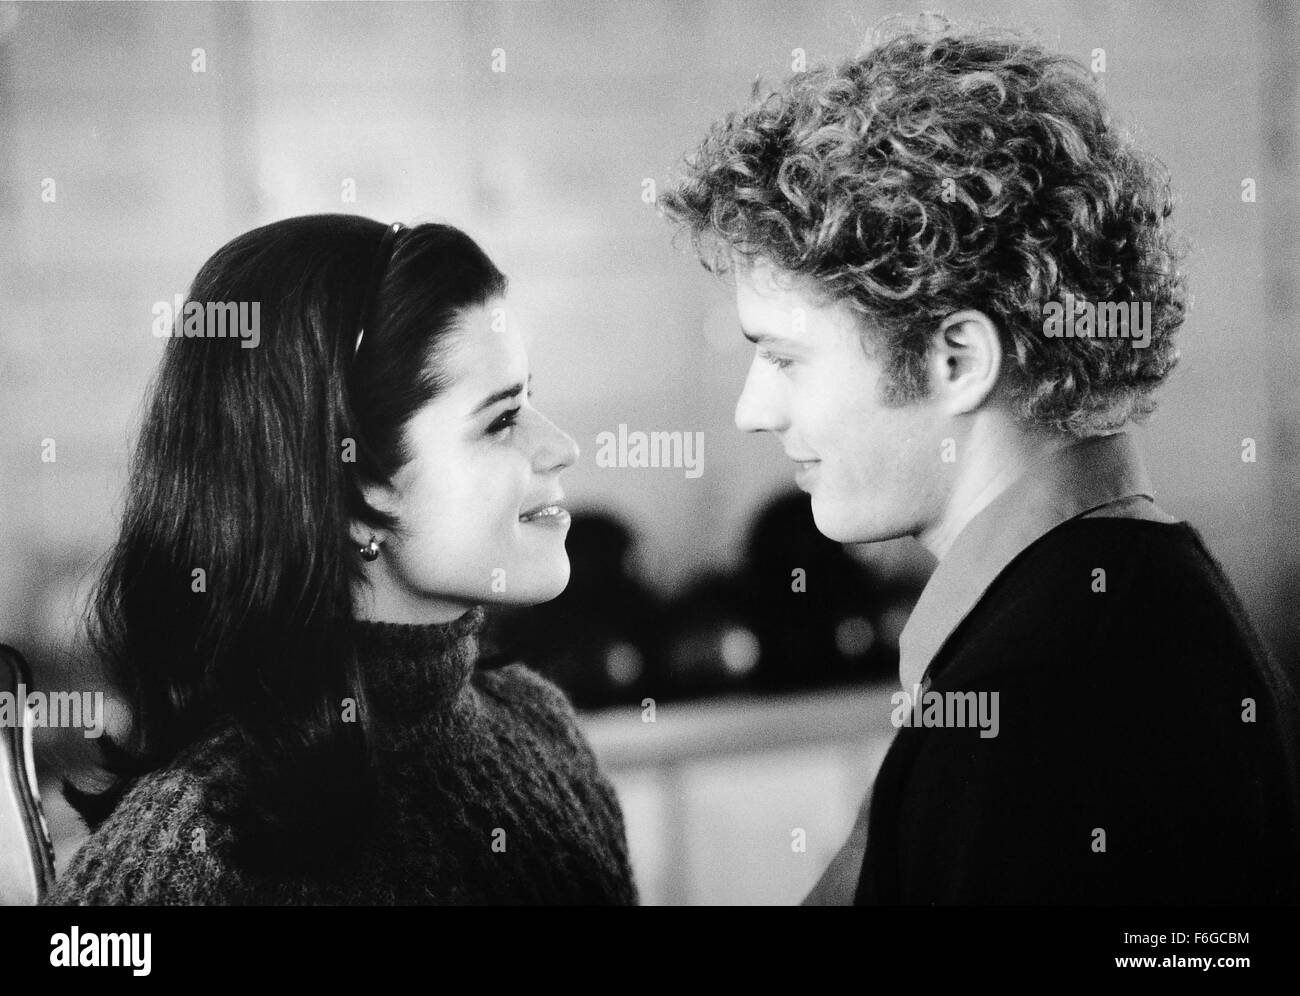 Sep 12, 1998; New York, NY, USA; Actor RYAN PHILLIPPE as Shane O'Shea and Actress NEVE CAMPBELL as Julie Black in '54'. Directed by Mark Christopher. Stock Photo